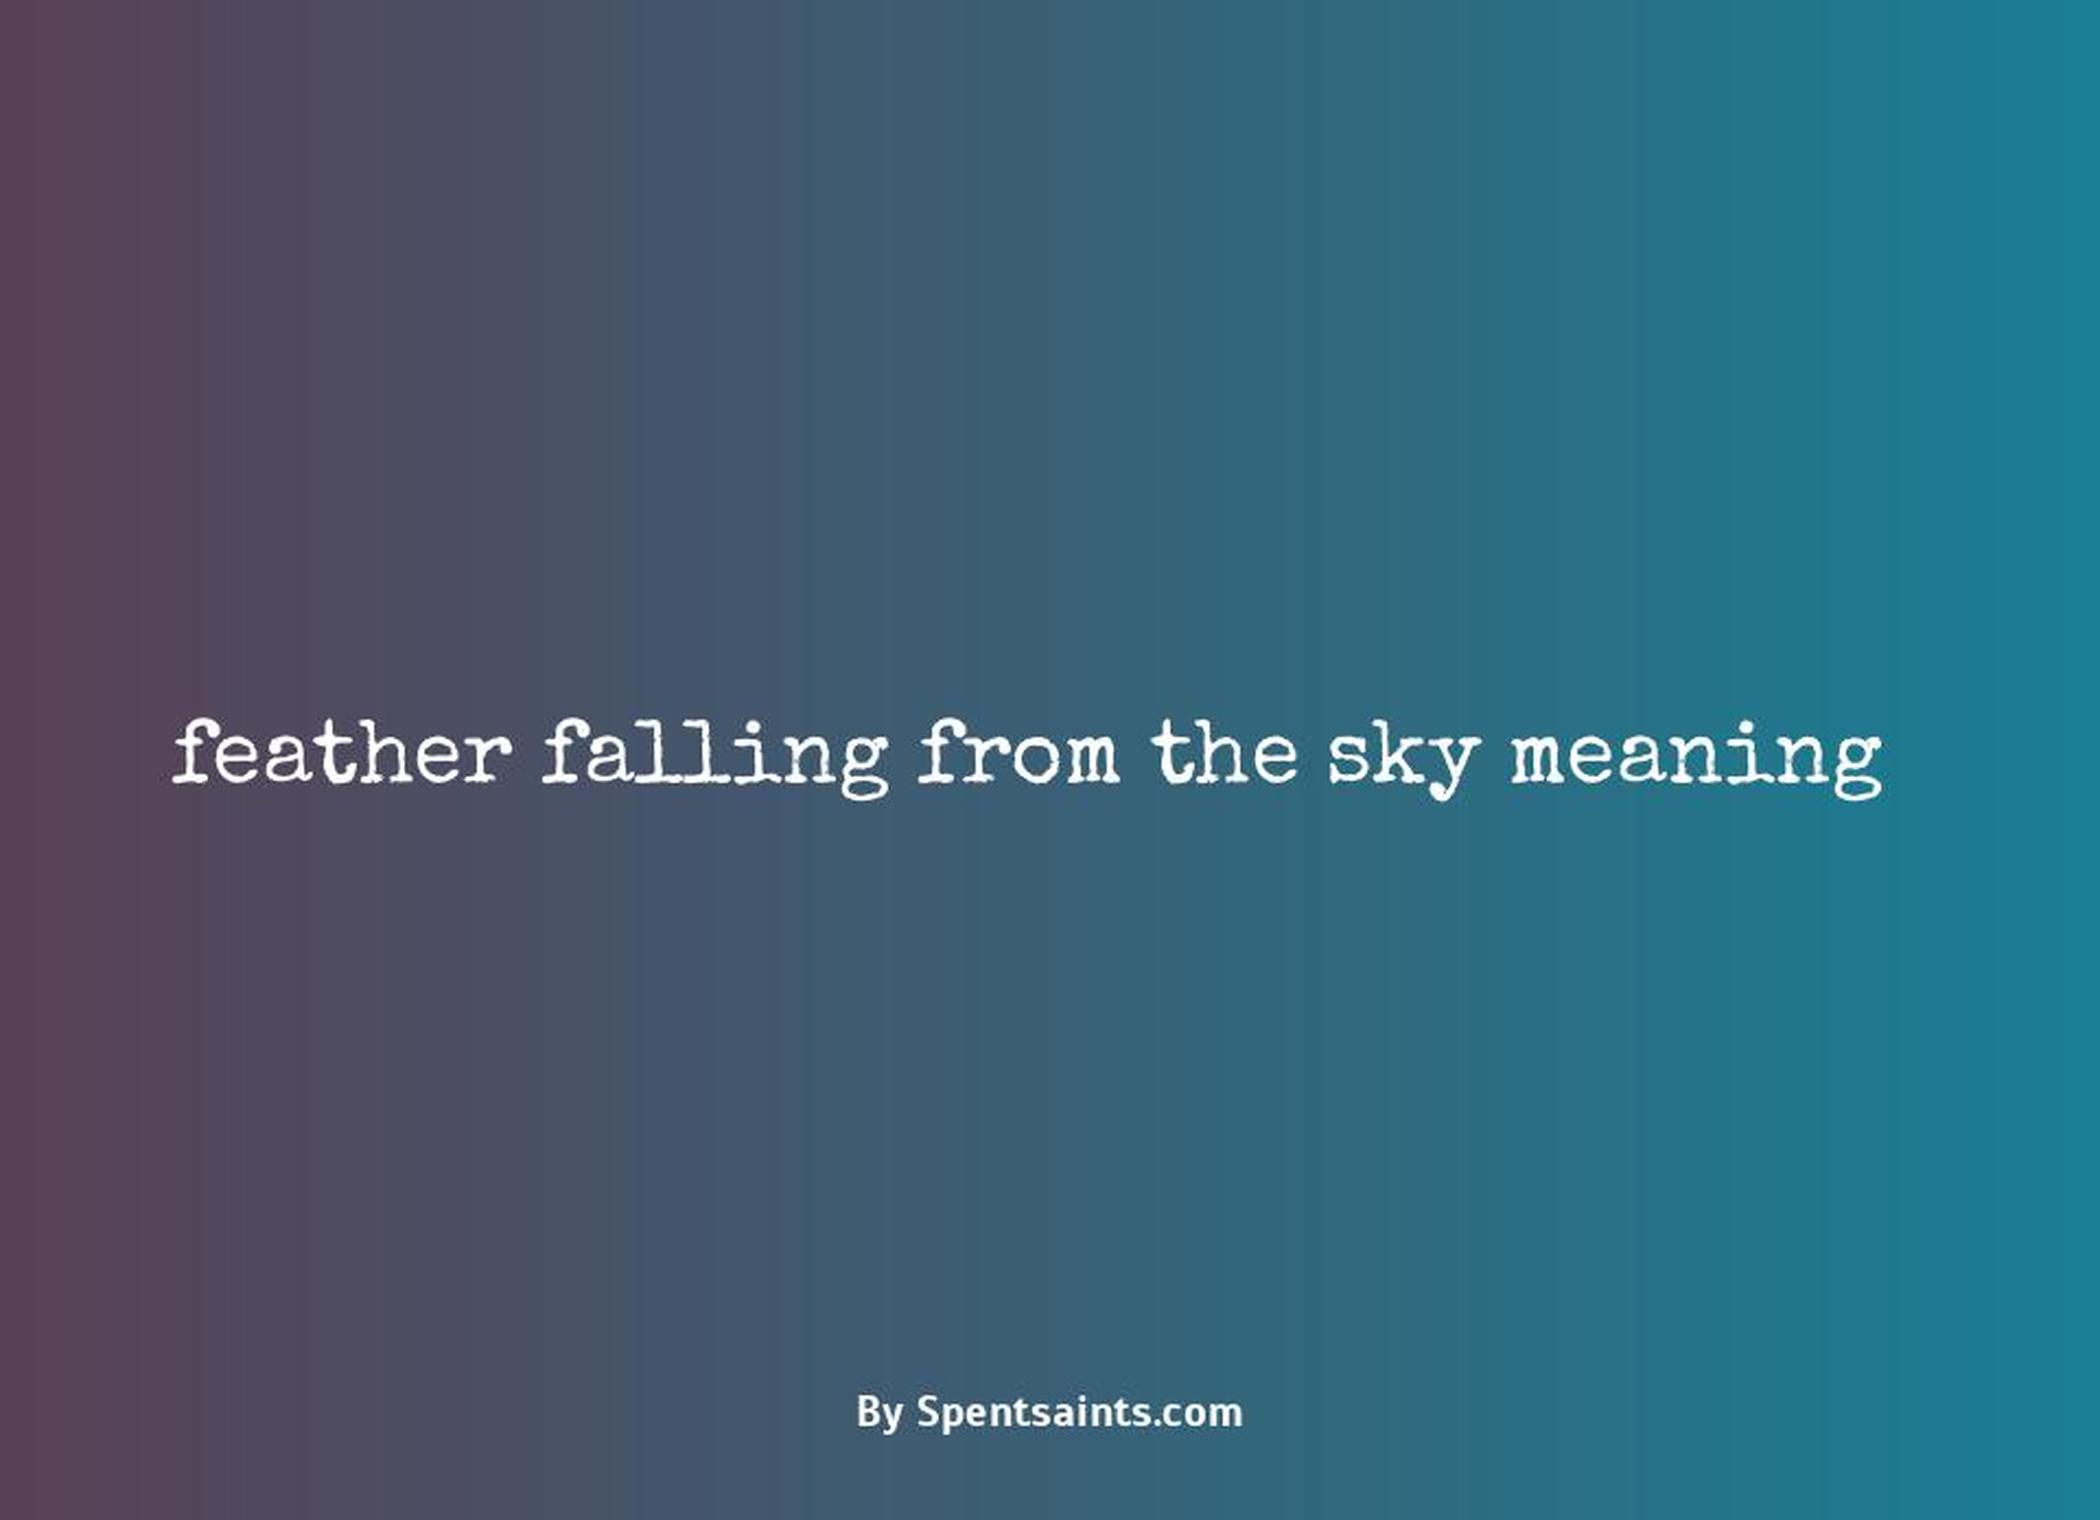 feather falling from the sky meaning